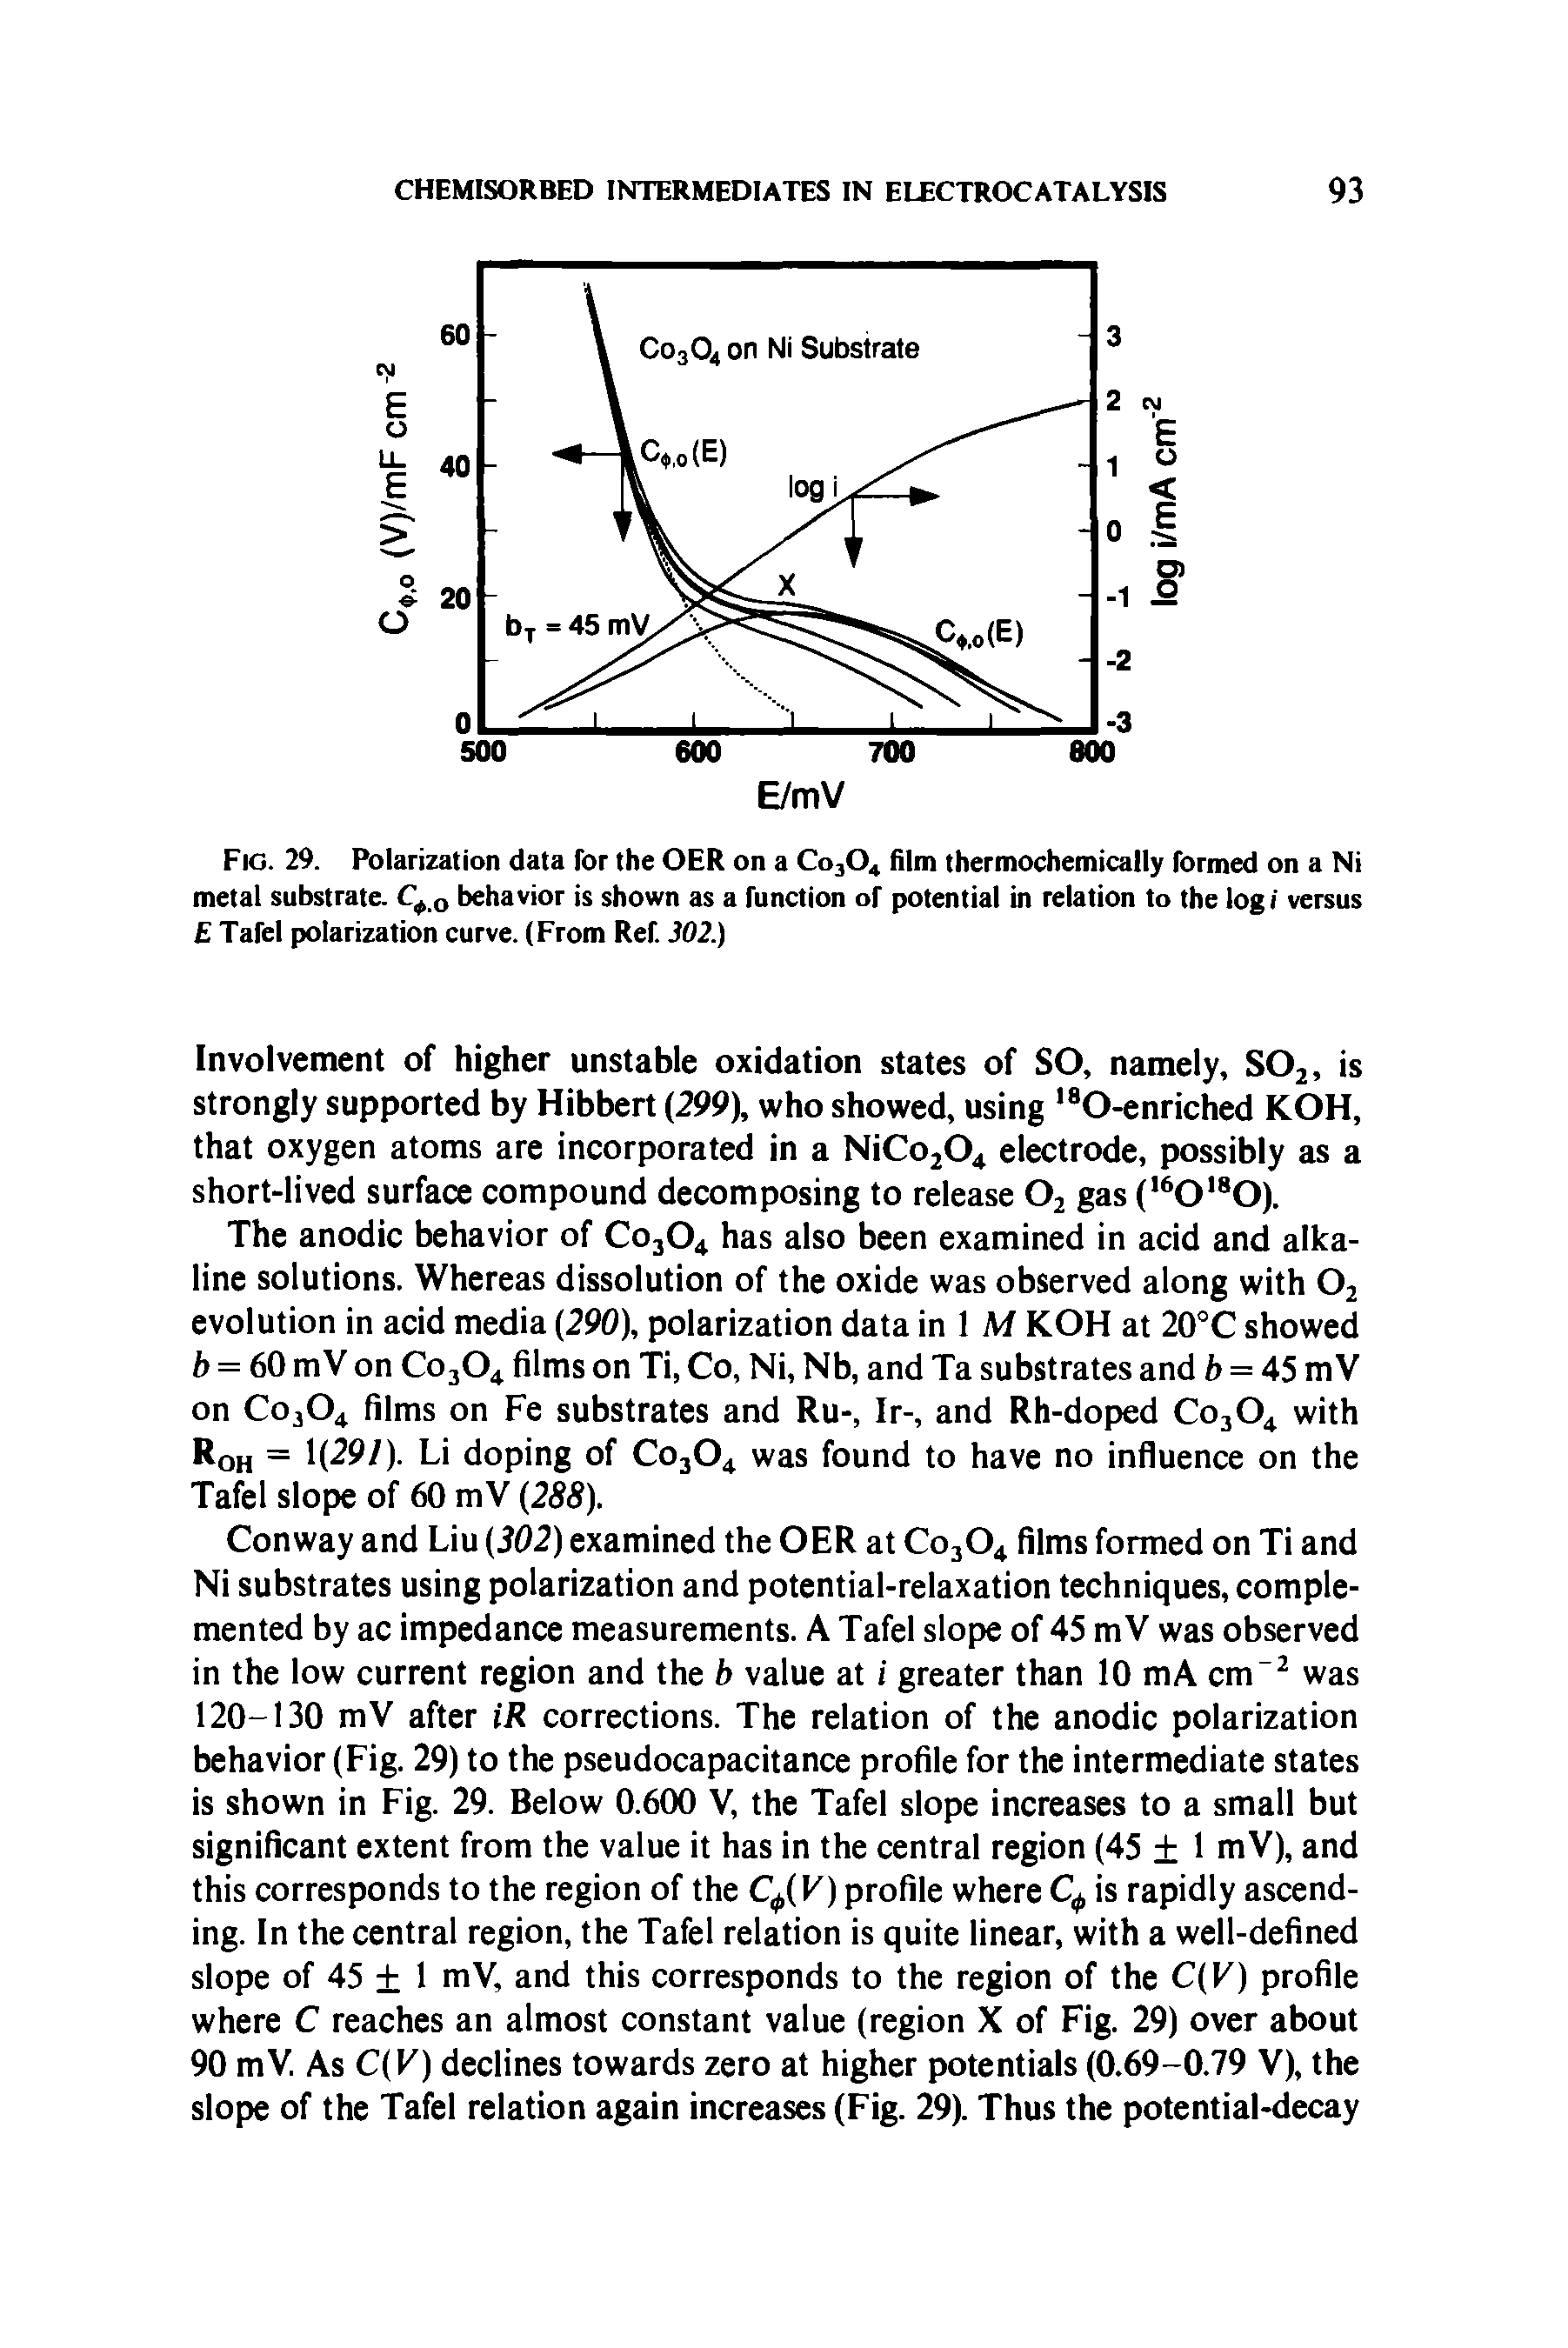 Fig. 29. Polarization data for the OER on a C03O4 film thermochemically formed on a Ni metal substrate. behavior is shown as a function of potential in relation to the logi versus Tafel polarization curve. (From Ref 302.)...